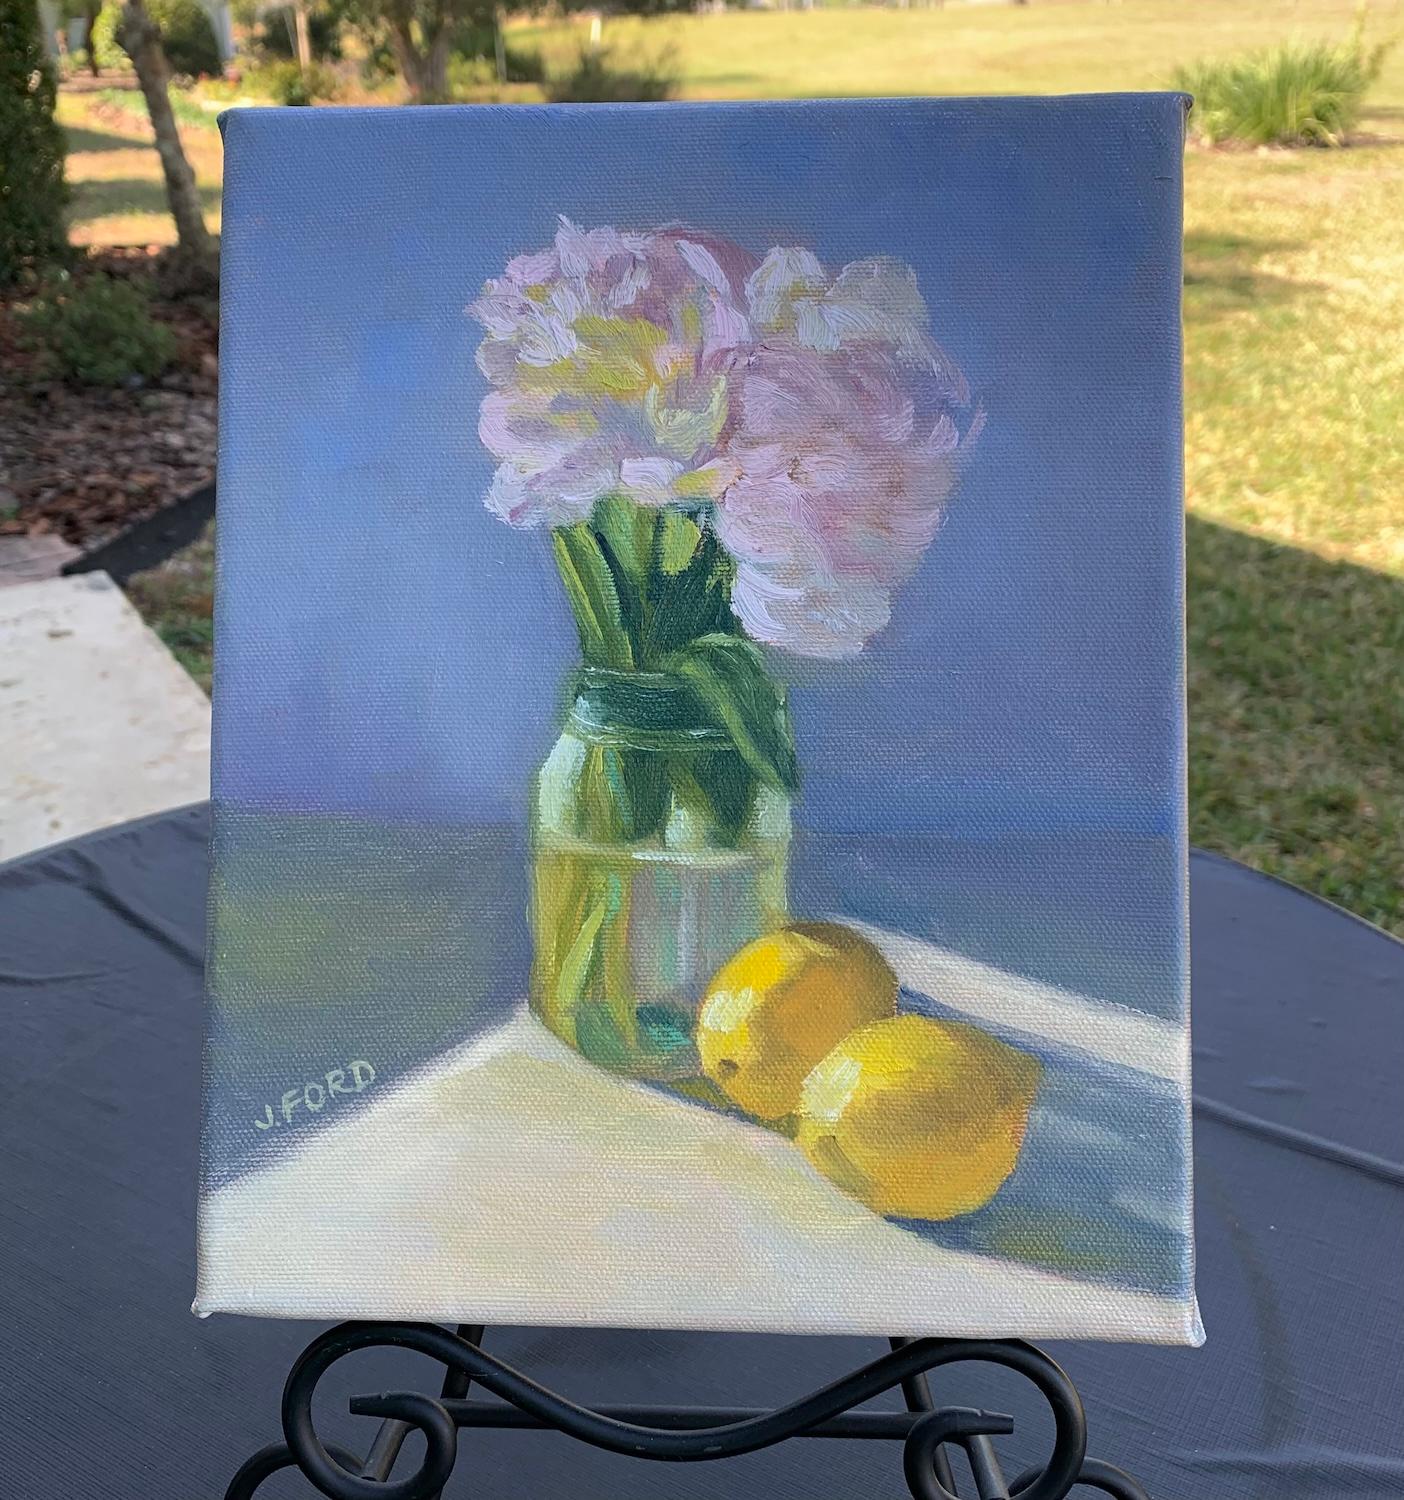 <p>Artist Comments<br>Two lemons and a vase of dainty flowers glow under the gentle radiance of the sun, exuding timeless charm. Muted pinks and blues contrast with the vivid yellows. The soft strokes imbue the still life with a sense of stillness